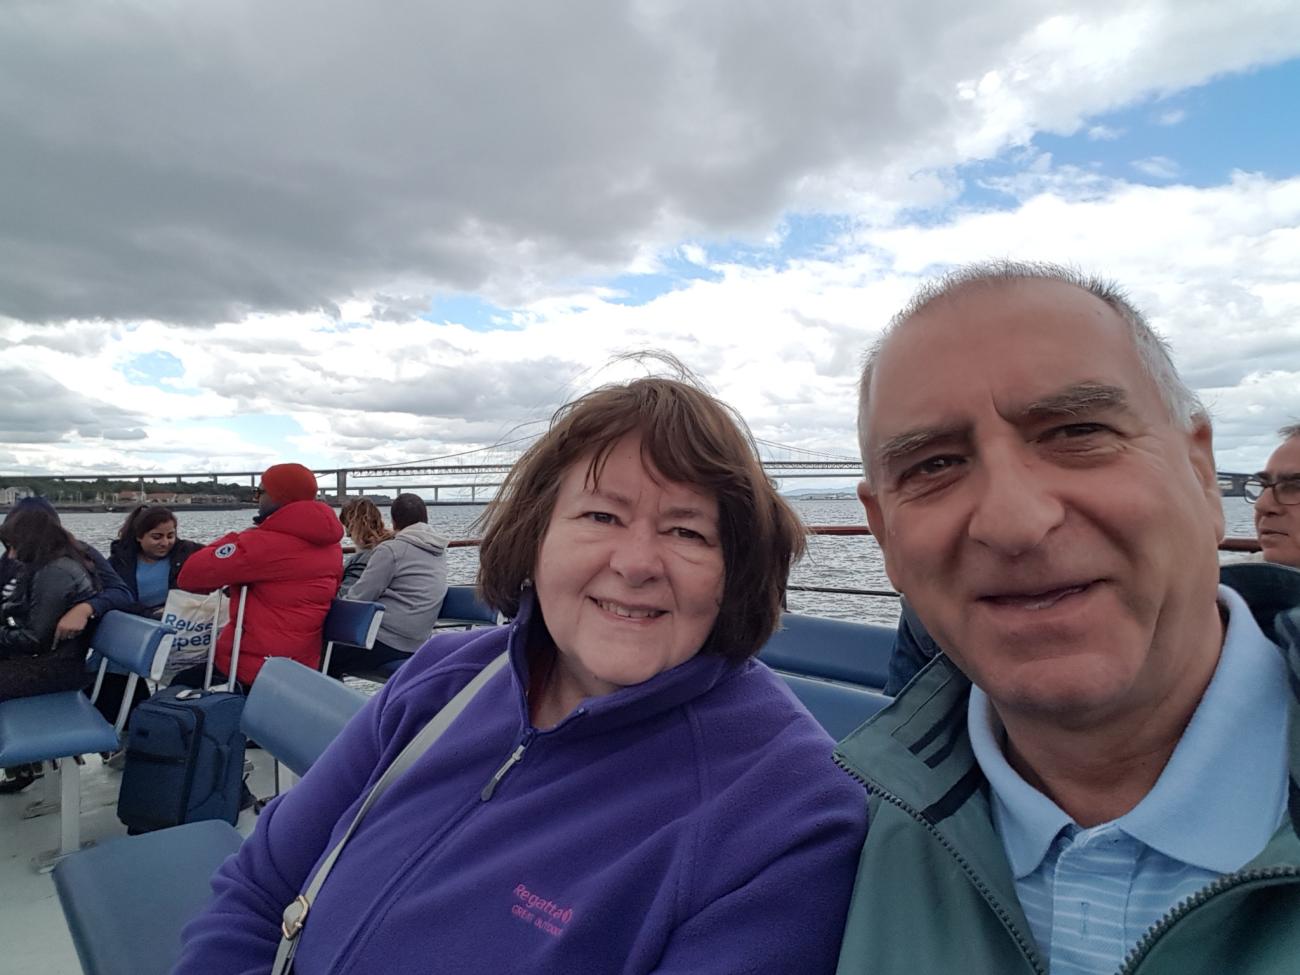 Robert and his wife Sylvia enjoying a boat trip on the Forth